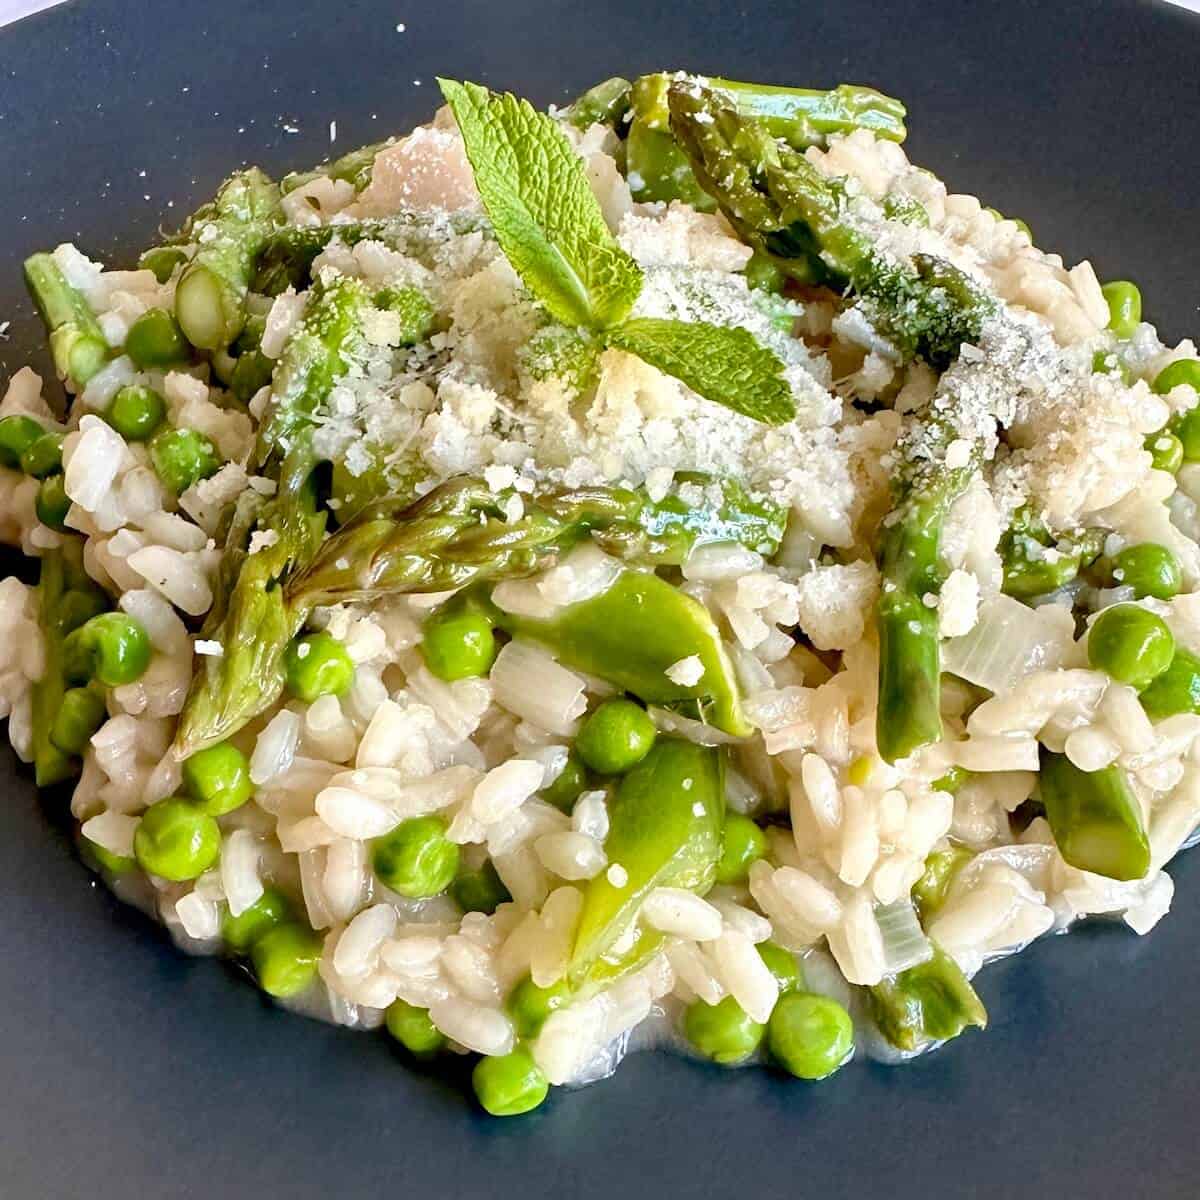 Spring vegetable risotto with asparagus and peas on a plate.